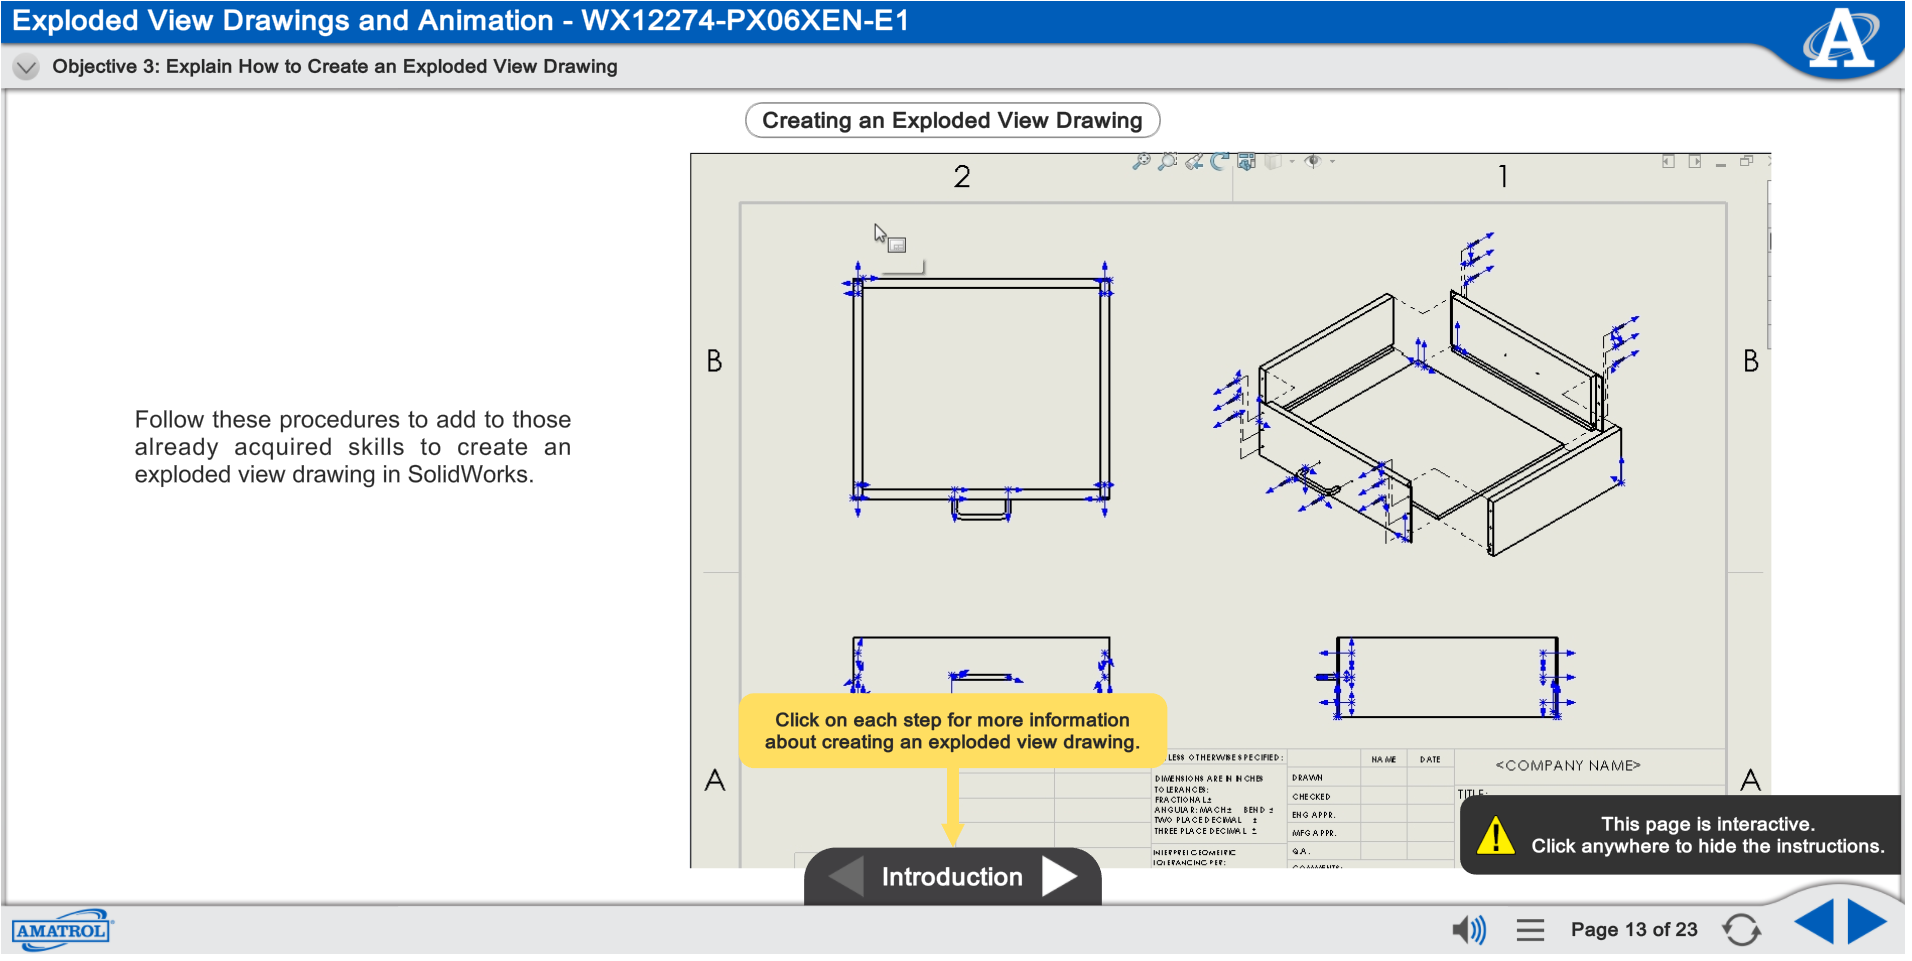 CAD 2 Exploded View Drawings and Animation eLearning